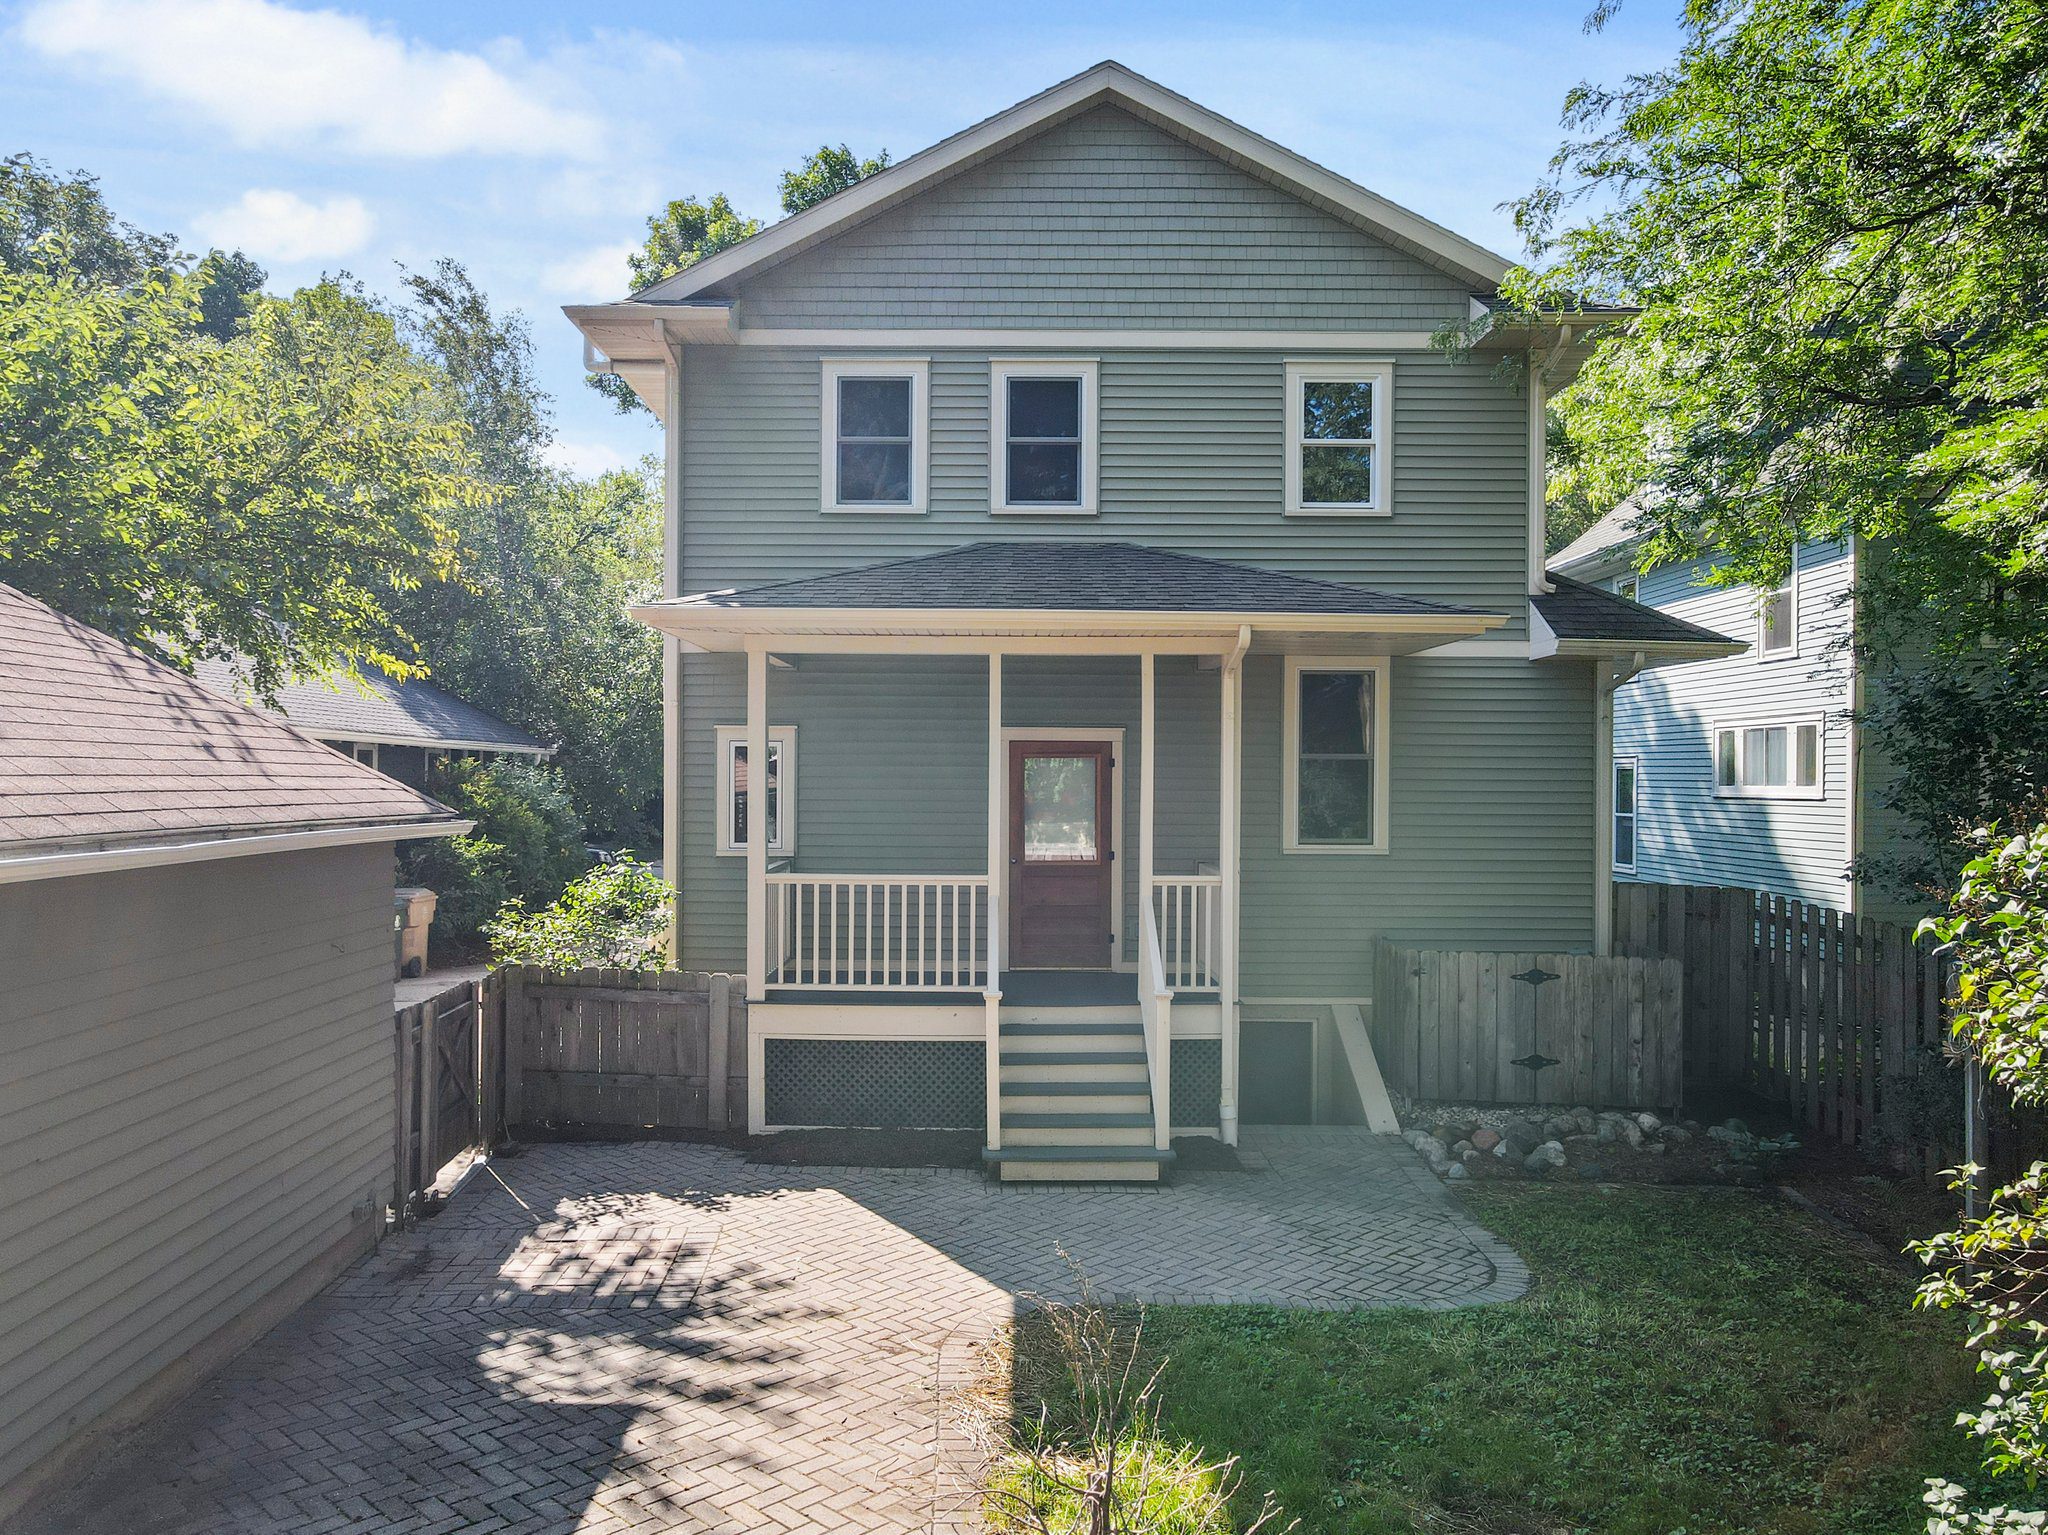 12-web-or-mls-2218-west-lawn-ave